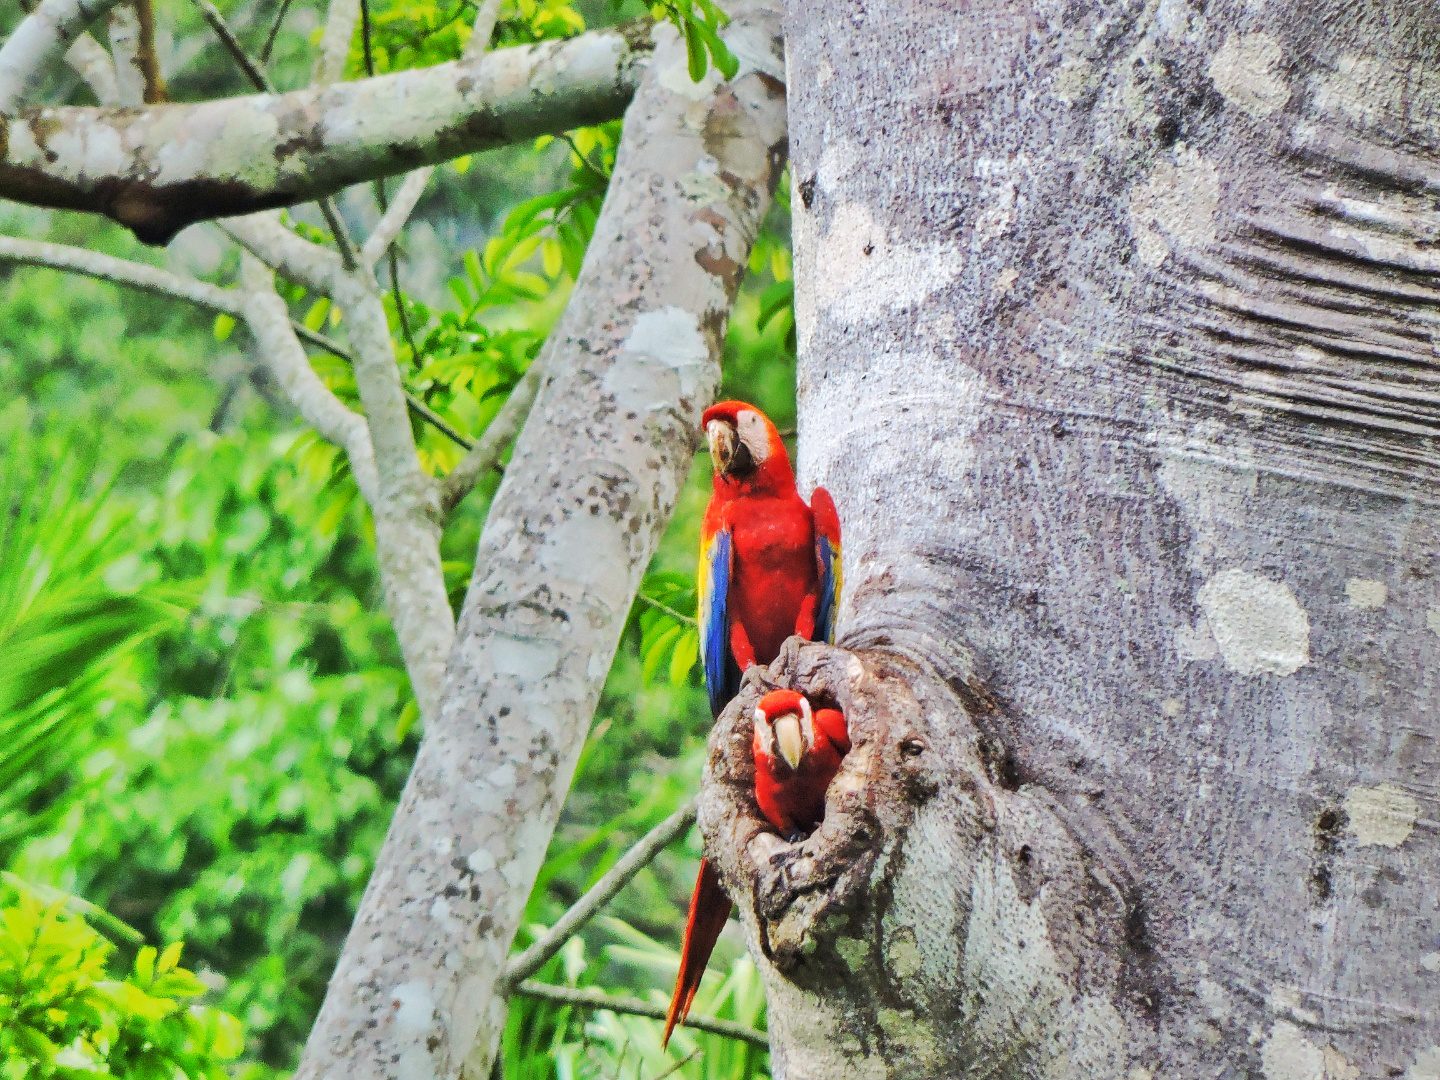 Fortis Belize Limited (FBL) staff joined FCD to learn more about the initiative that protects scarlet macaws in the Chiquibul.